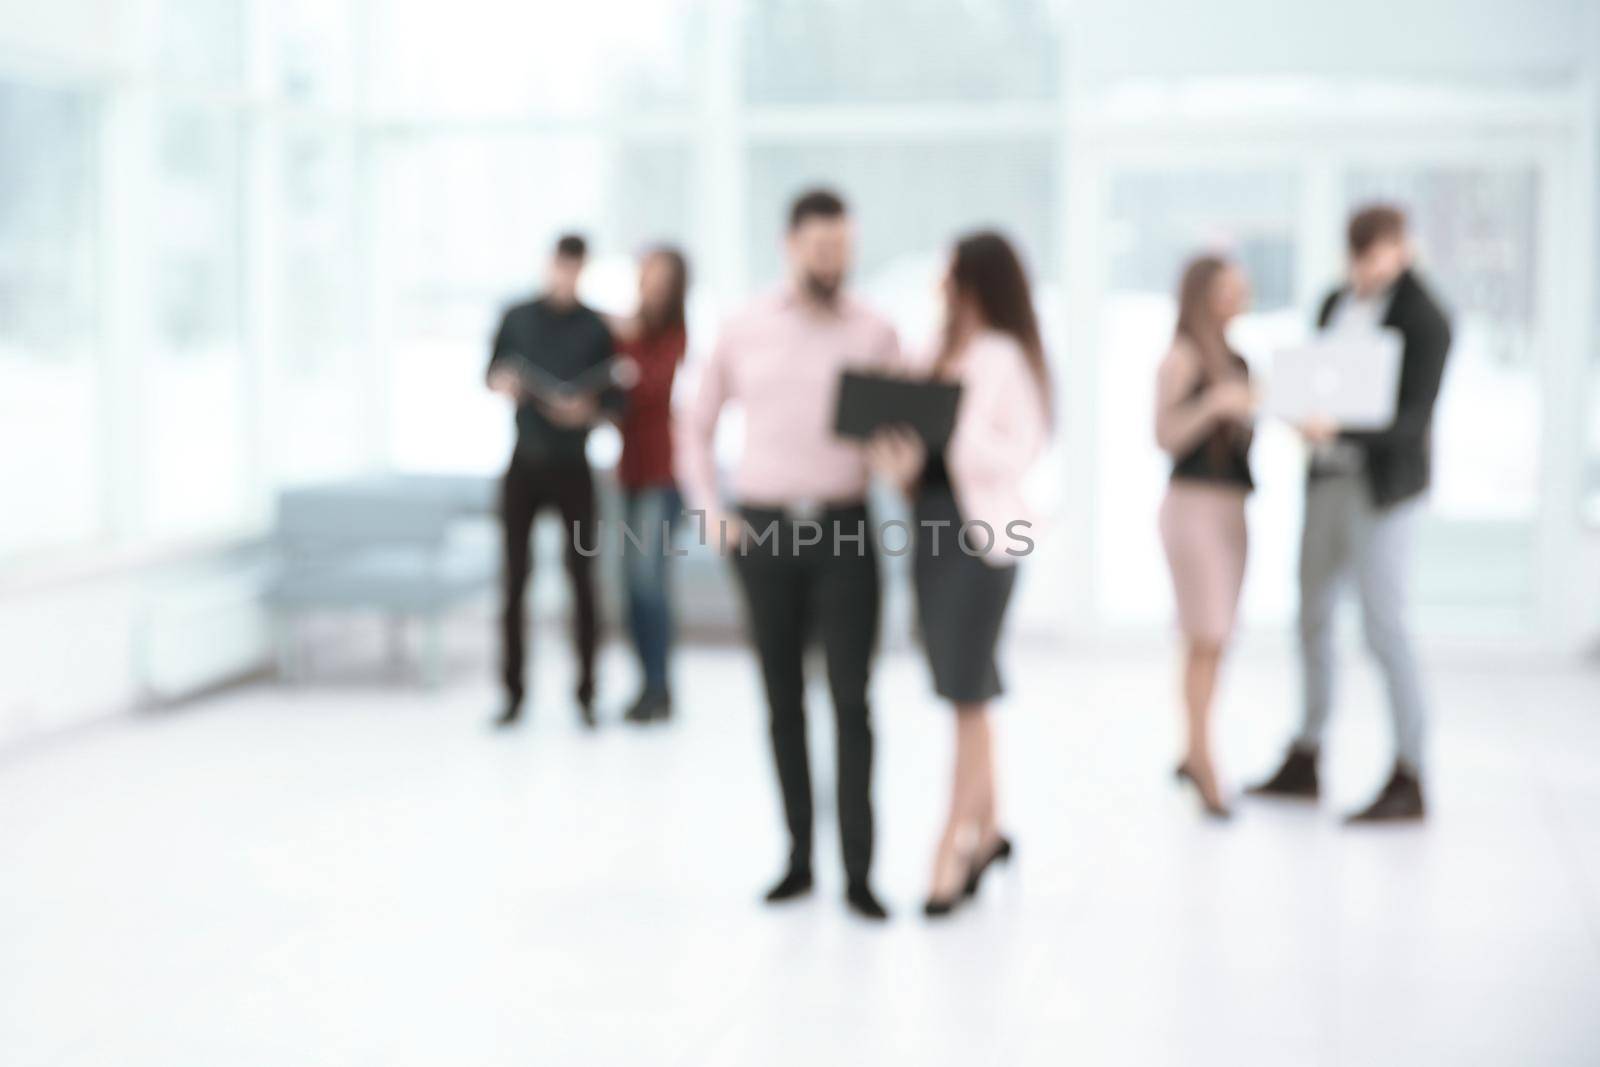 blurred image of a group of business people talking in the office lobby. business background.